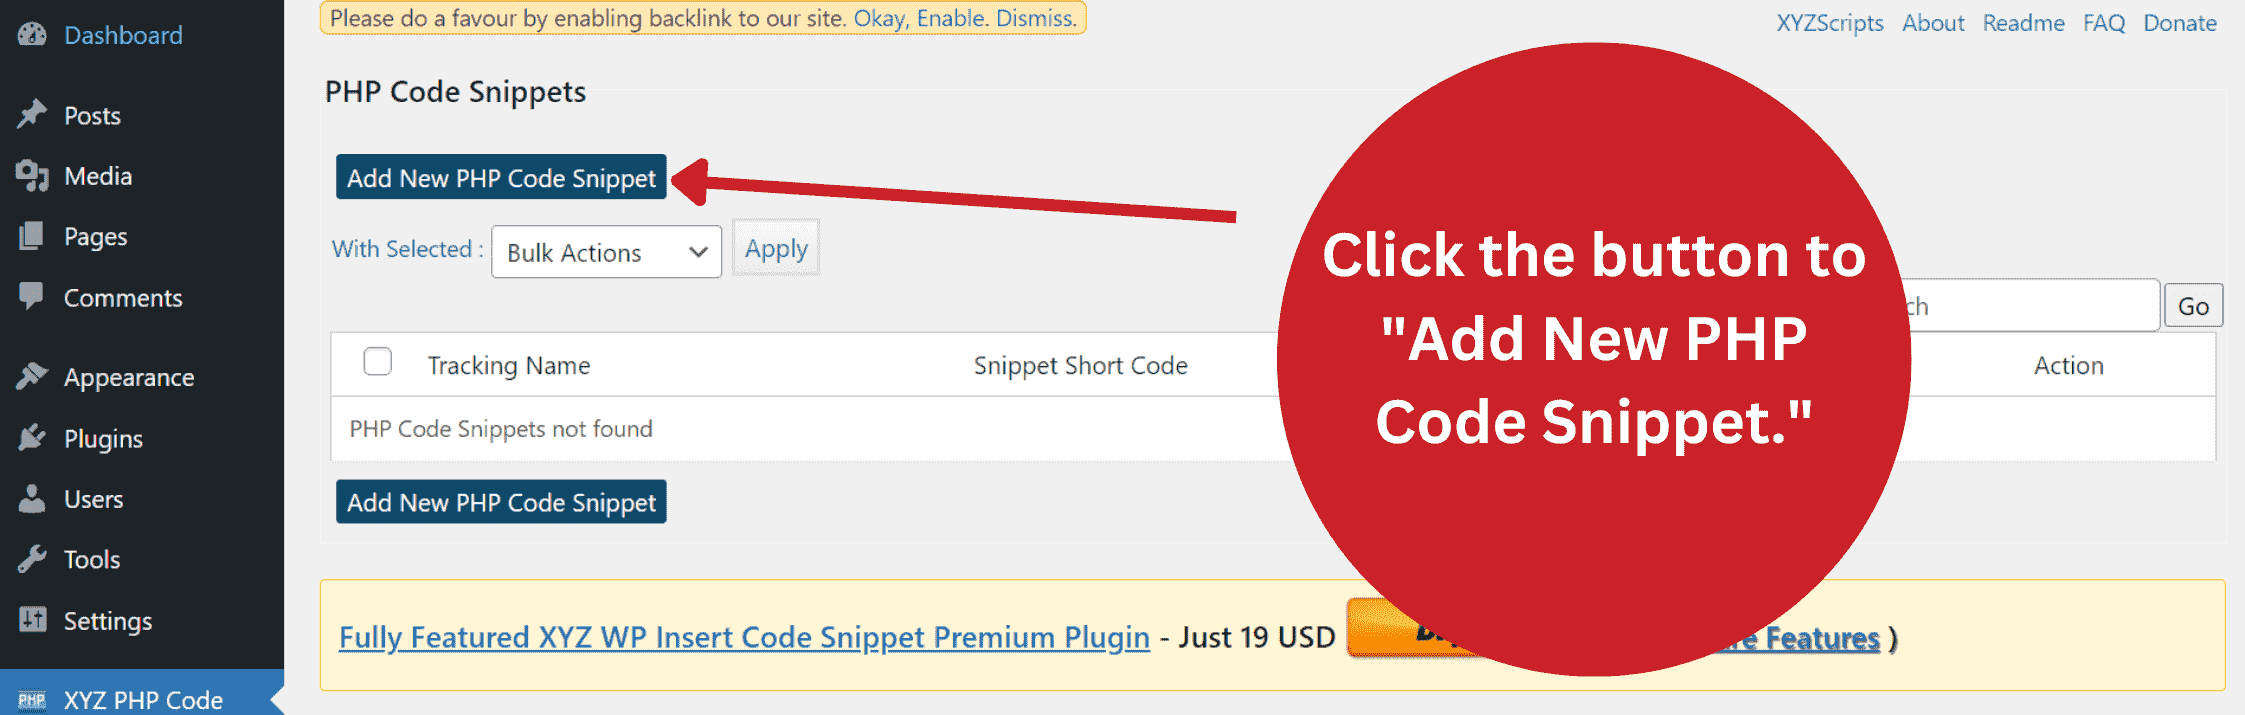 Add New PHP Code Snippet